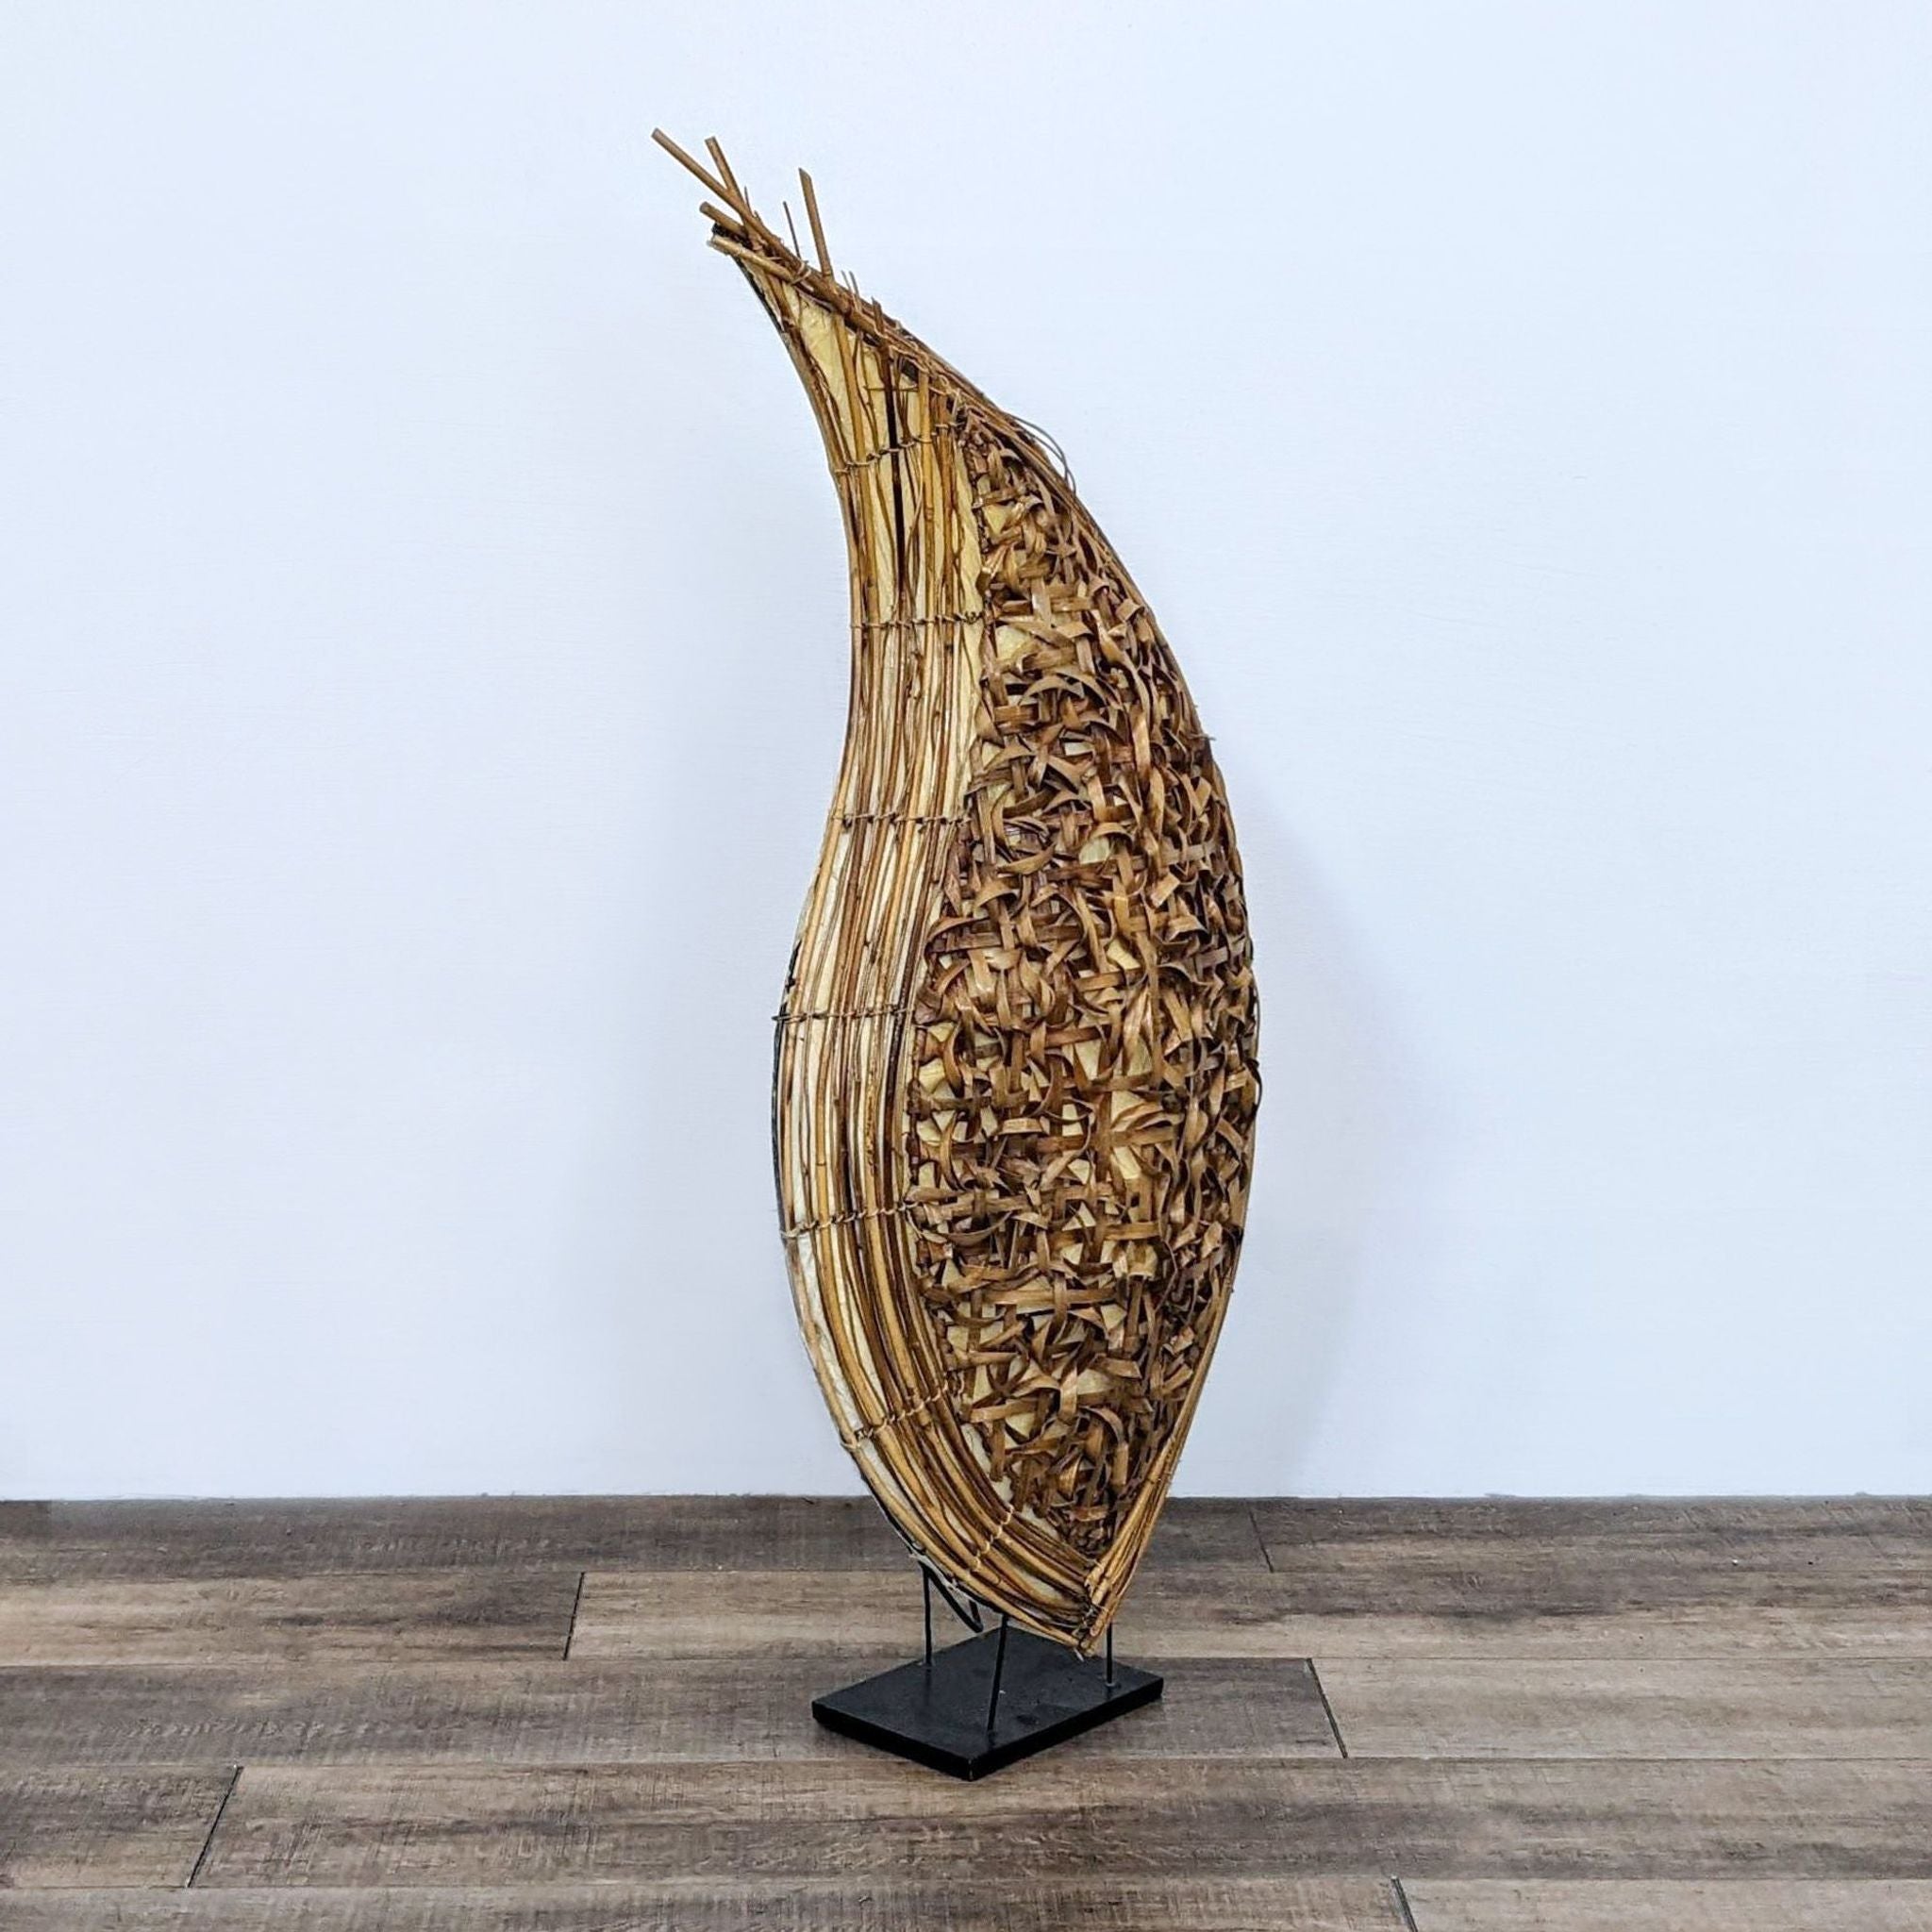 Abstract teardrop-shaped lighted sculpture by Reperch, crafted with natural woven materials on a black stand.